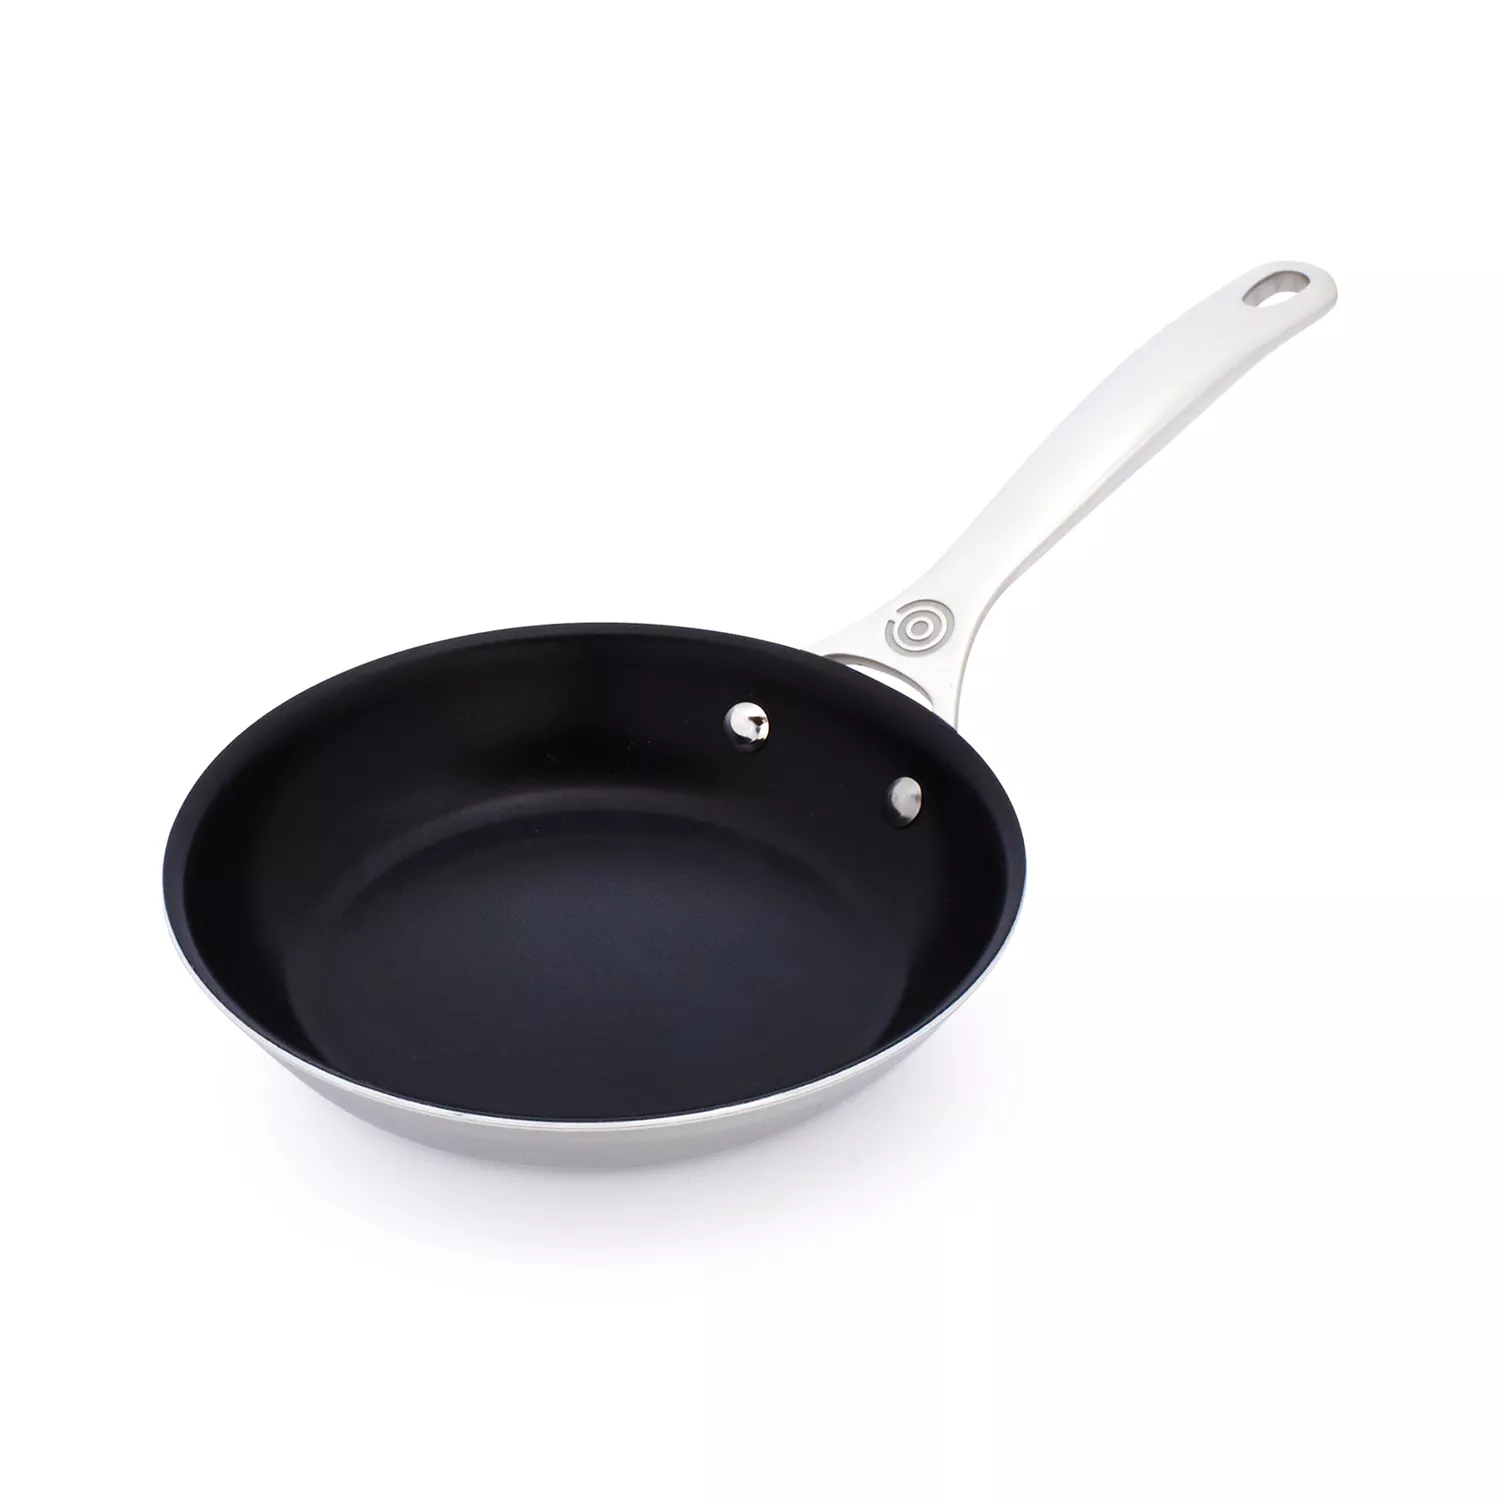 Photos - Pan Le Creuset Stainless Steel Nonstick Skillet SSP2300-20 